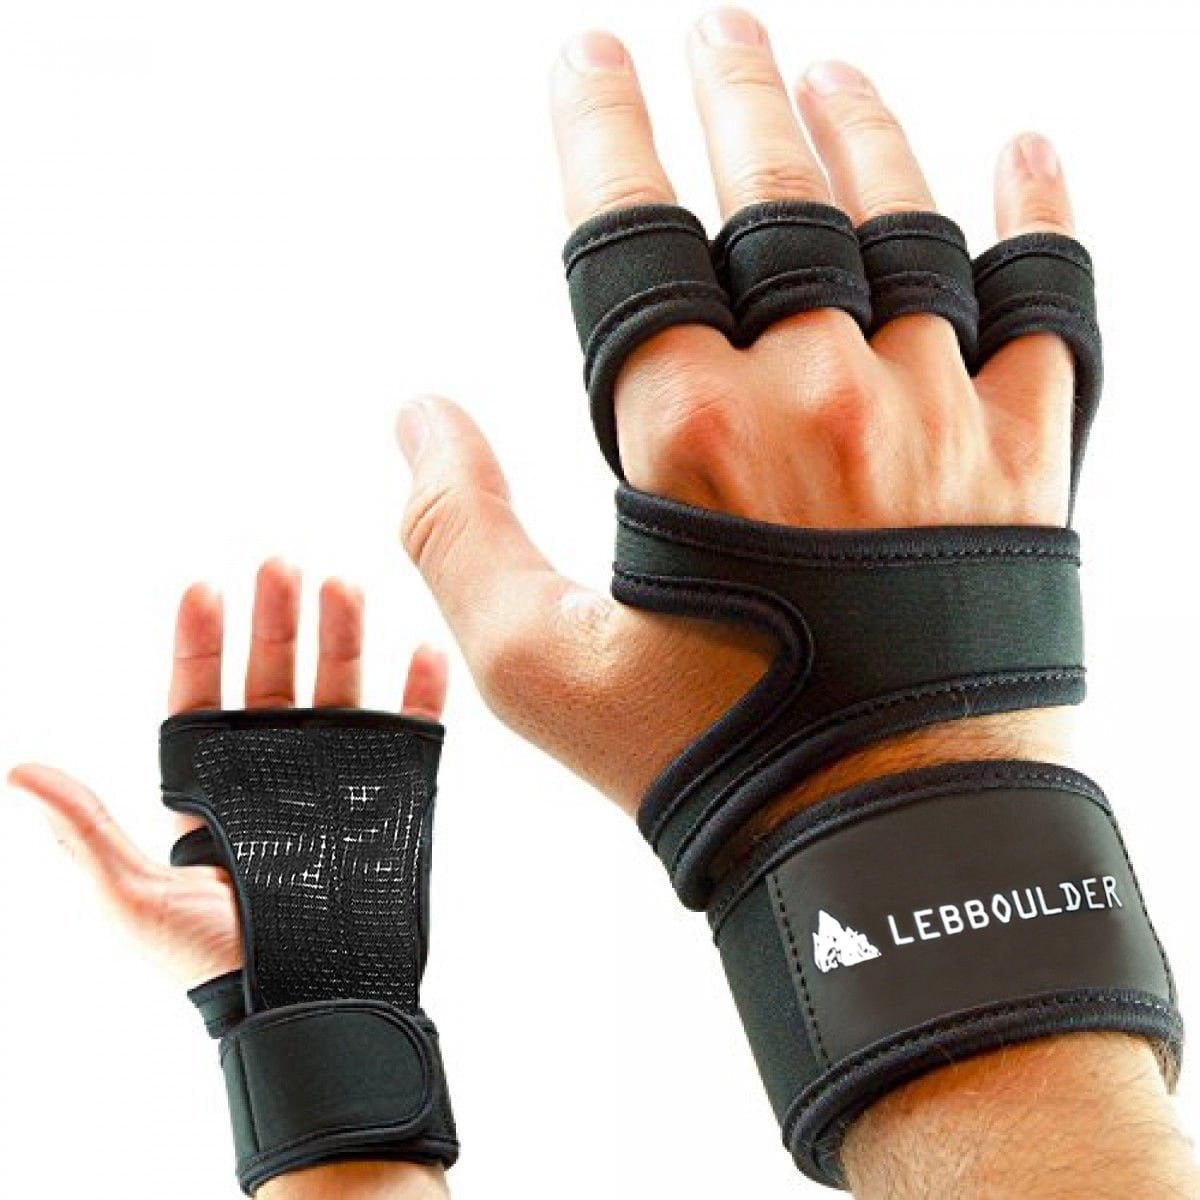 New Grips cross fit gymnastics hand grip guard palm protectors leather glove US 